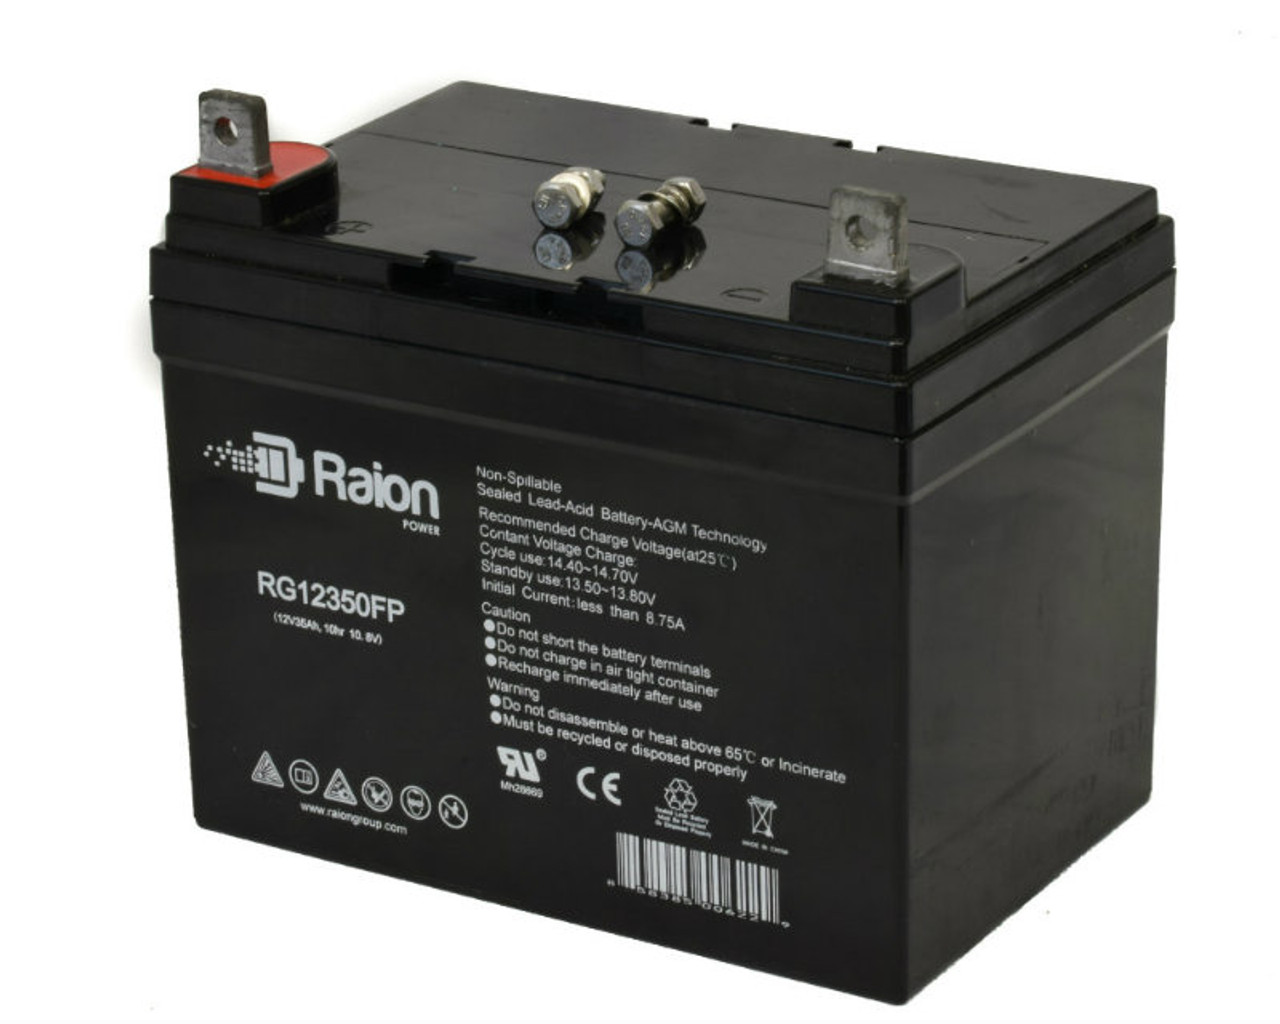 Raion Power Replacement 12V 35Ah RG12350FP Battery for Toro 30159